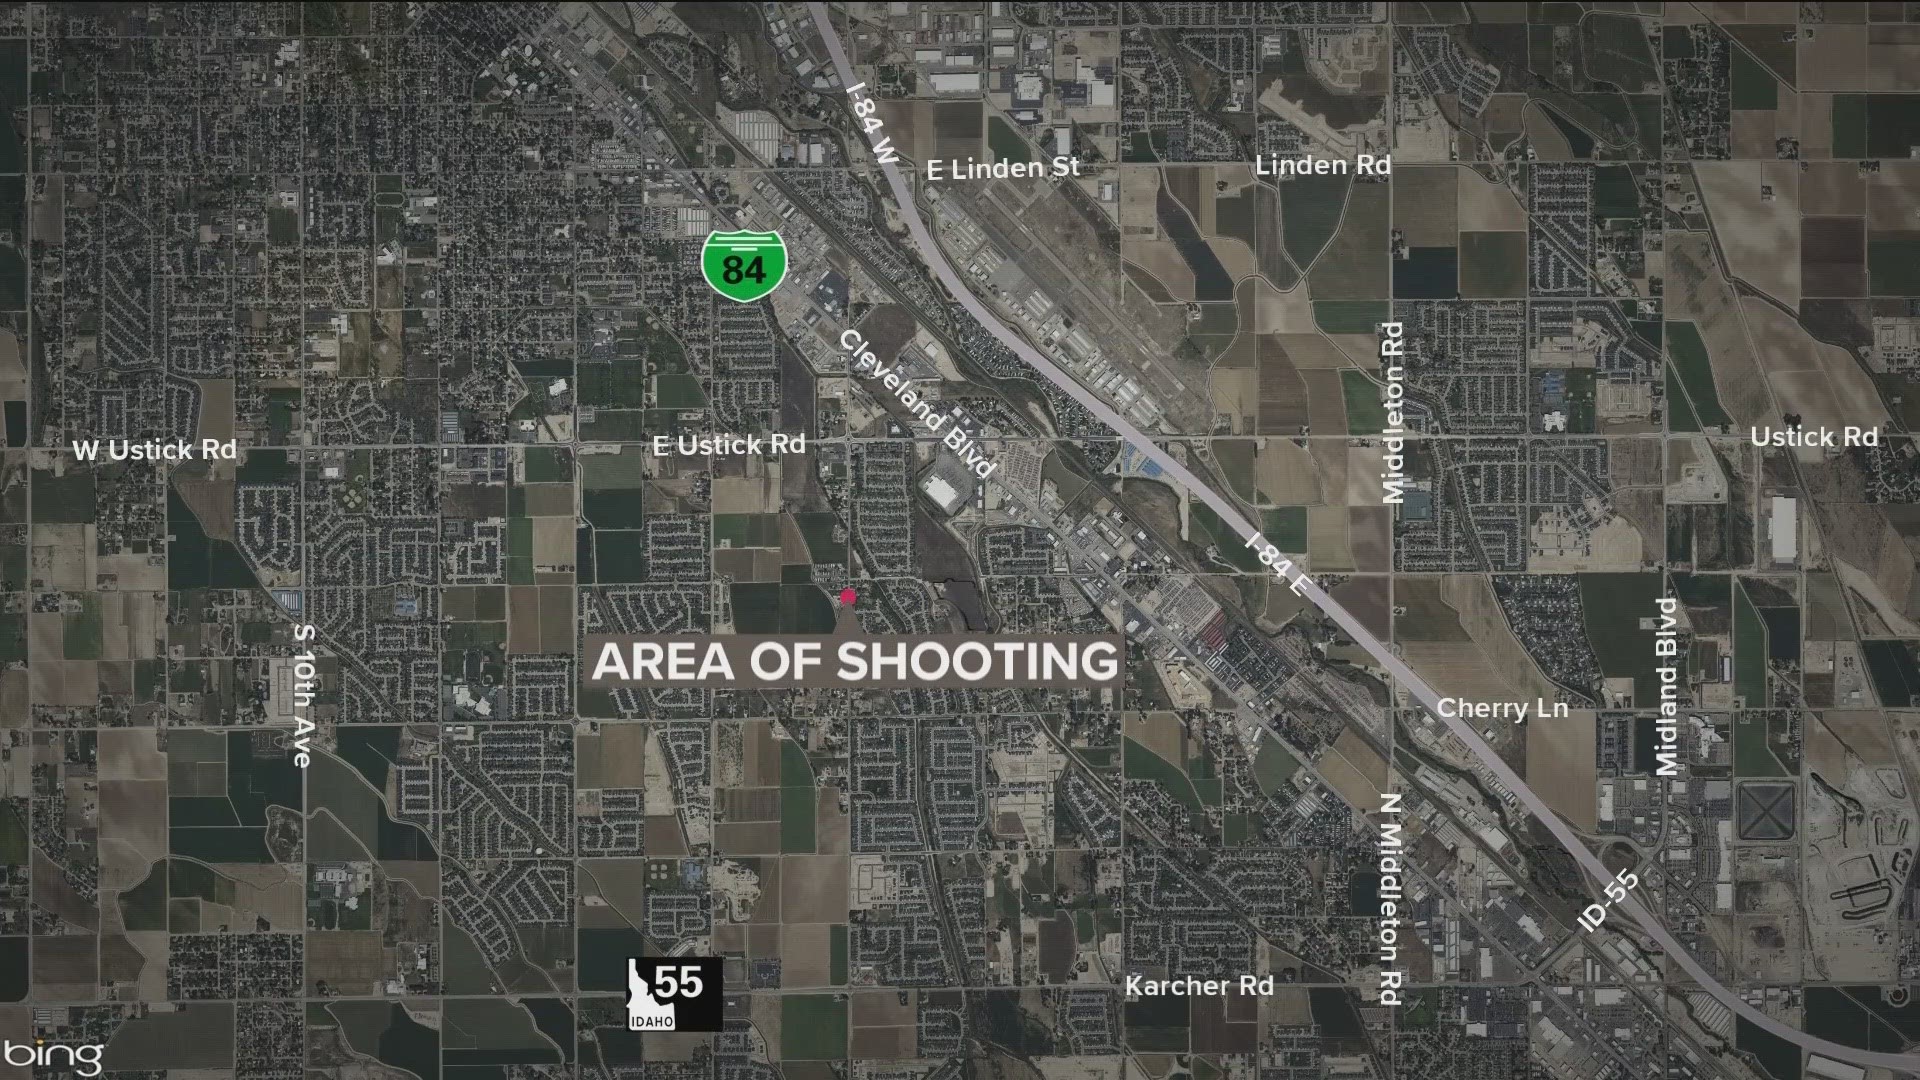 The shooting occurred south of Caldwell Wednesday morning, where police found a man with "multiple gunshot wounds," according to the Canyon County Sheriff's Office.